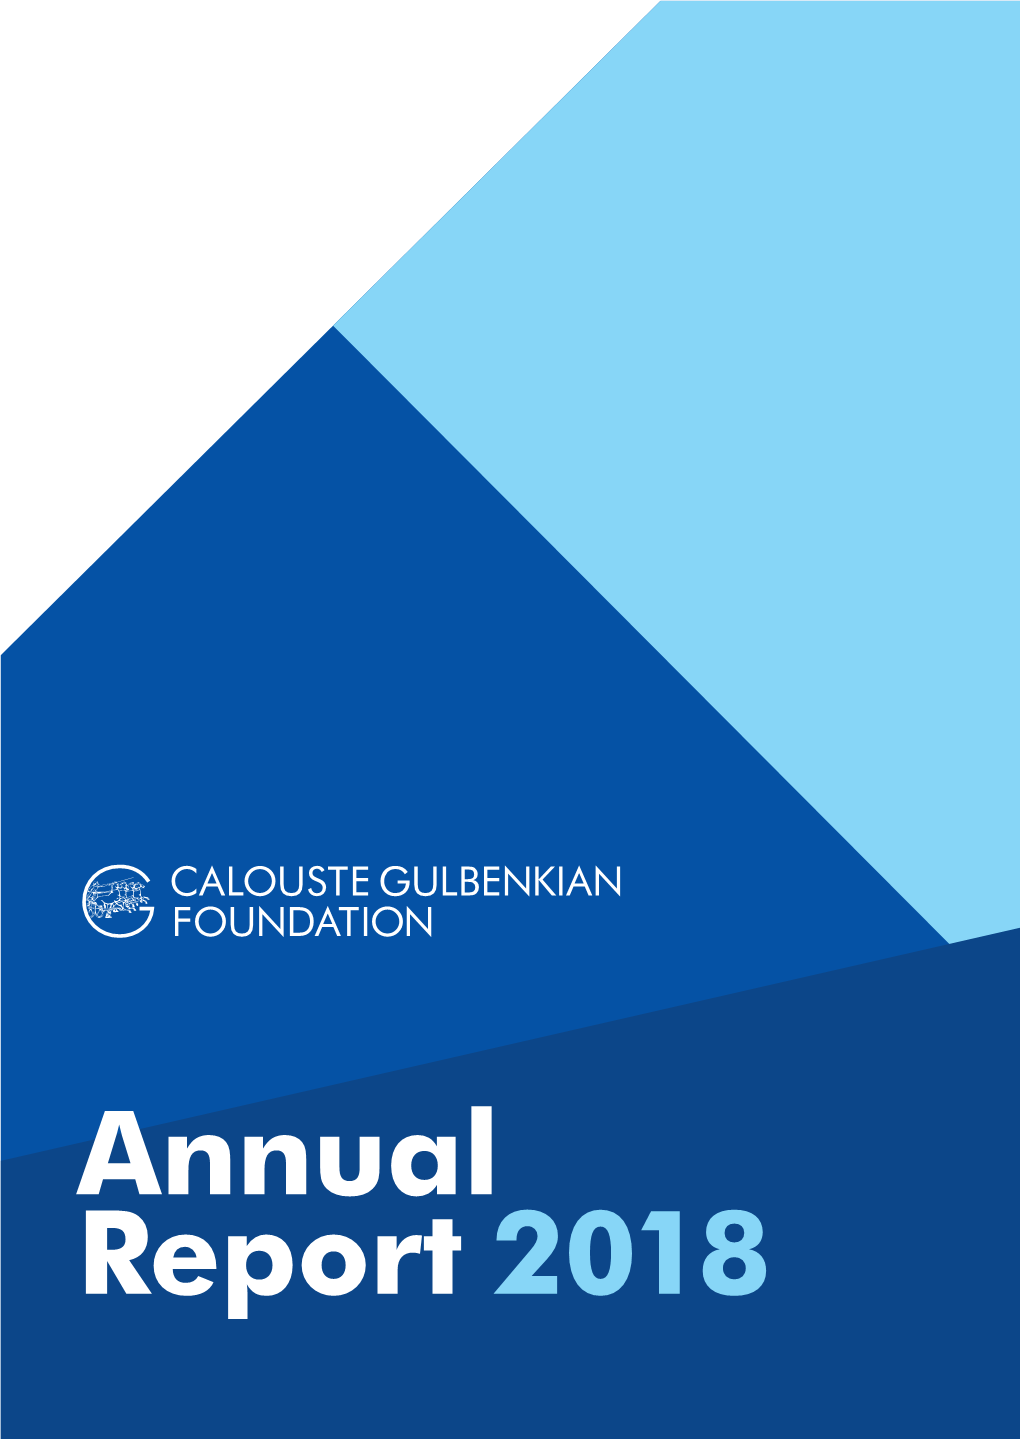 Annual Report 2018 Annual Report 2018 Introduction 074 190 004-013 Calouste Gulbenkian Museum Sustainable Gulbenkian